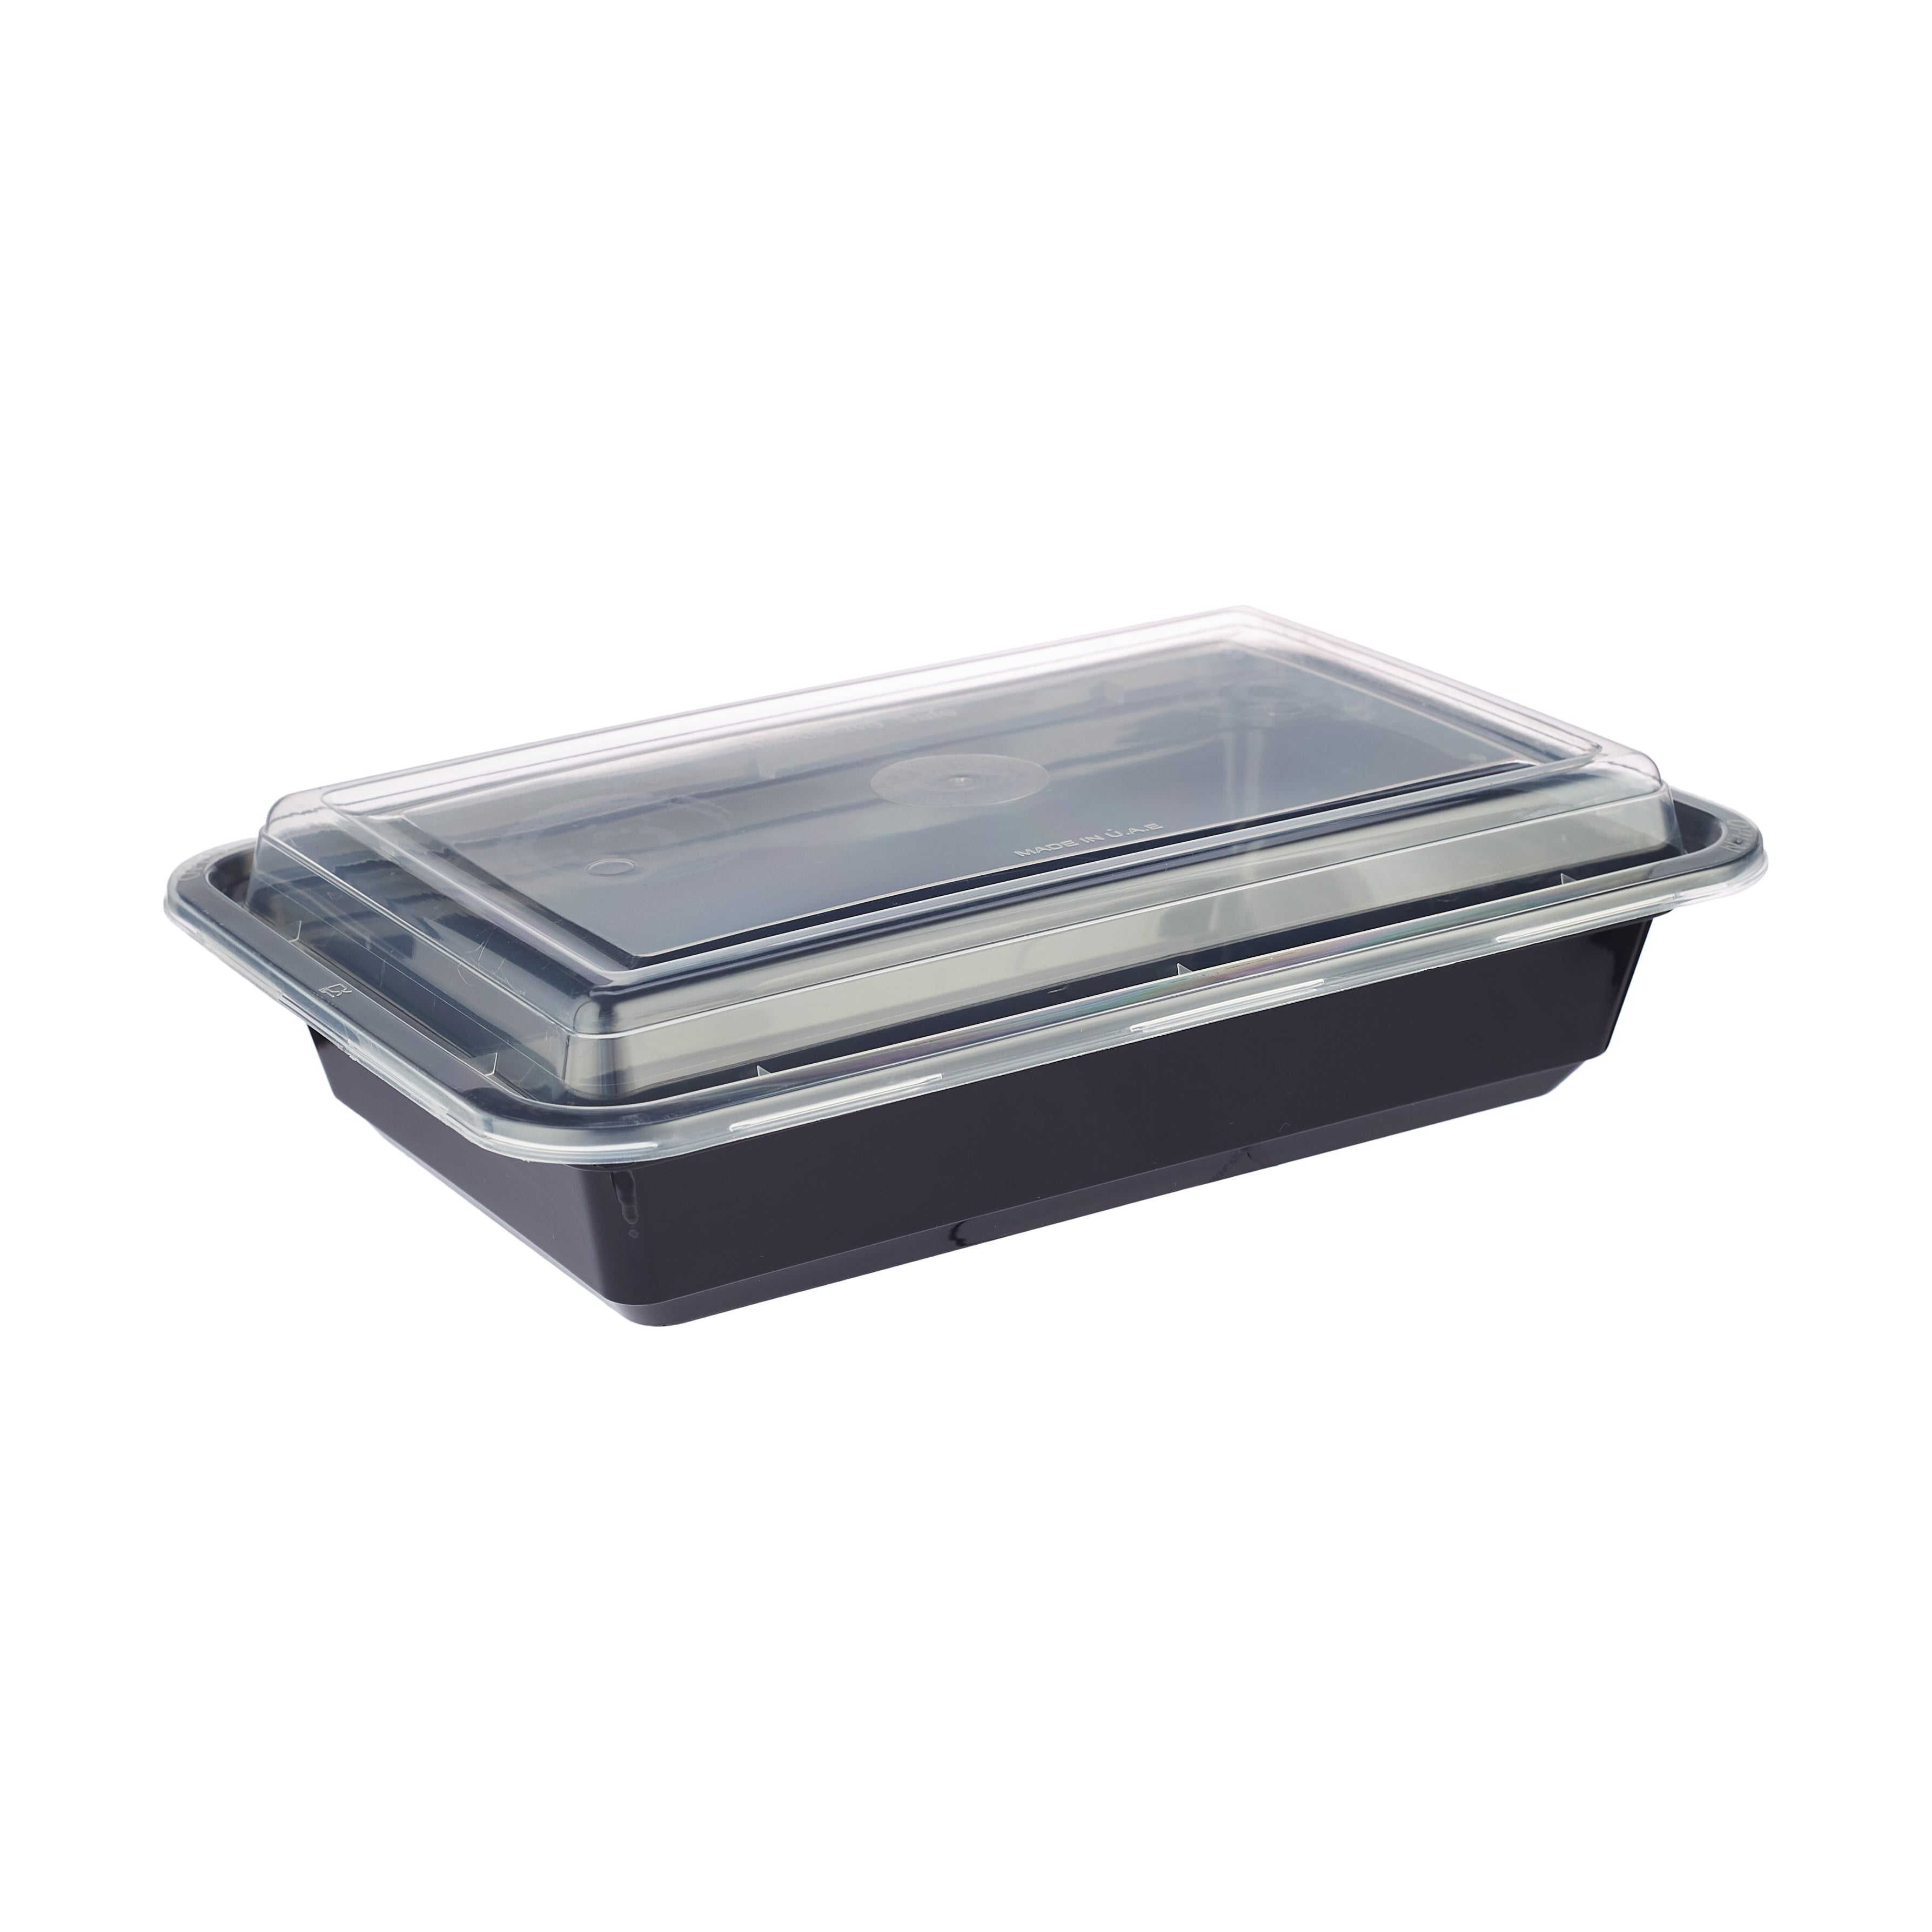 150 Pieces Black Base Rectangular Corrugated Container 32 Oz With Lid - Hotpack